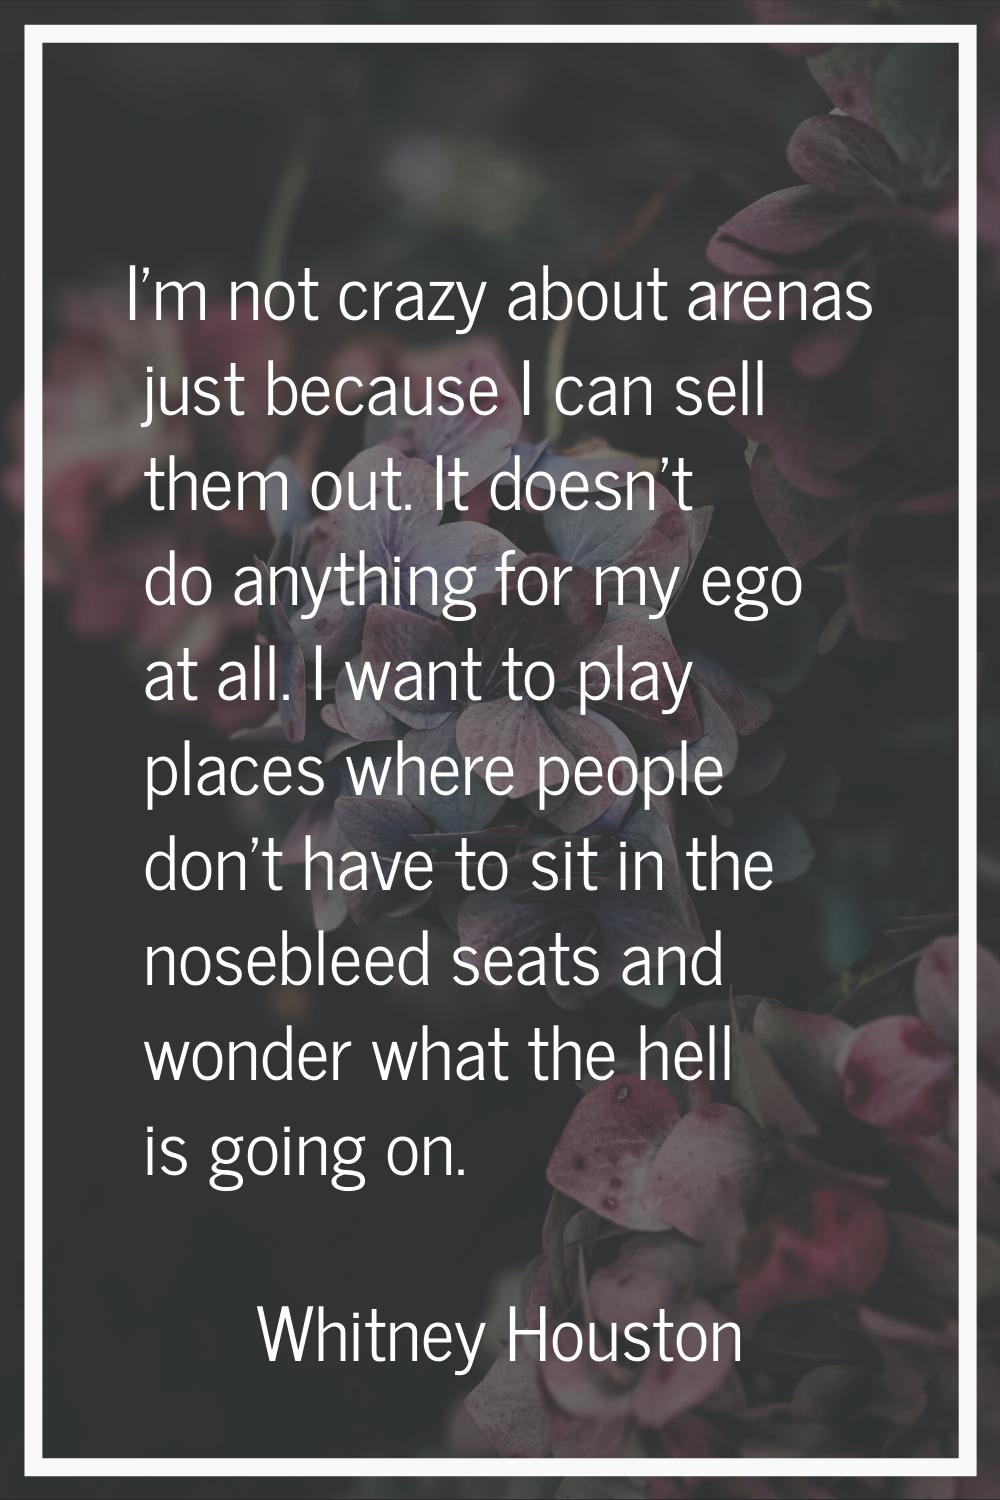 I'm not crazy about arenas just because I can sell them out. It doesn't do anything for my ego at a